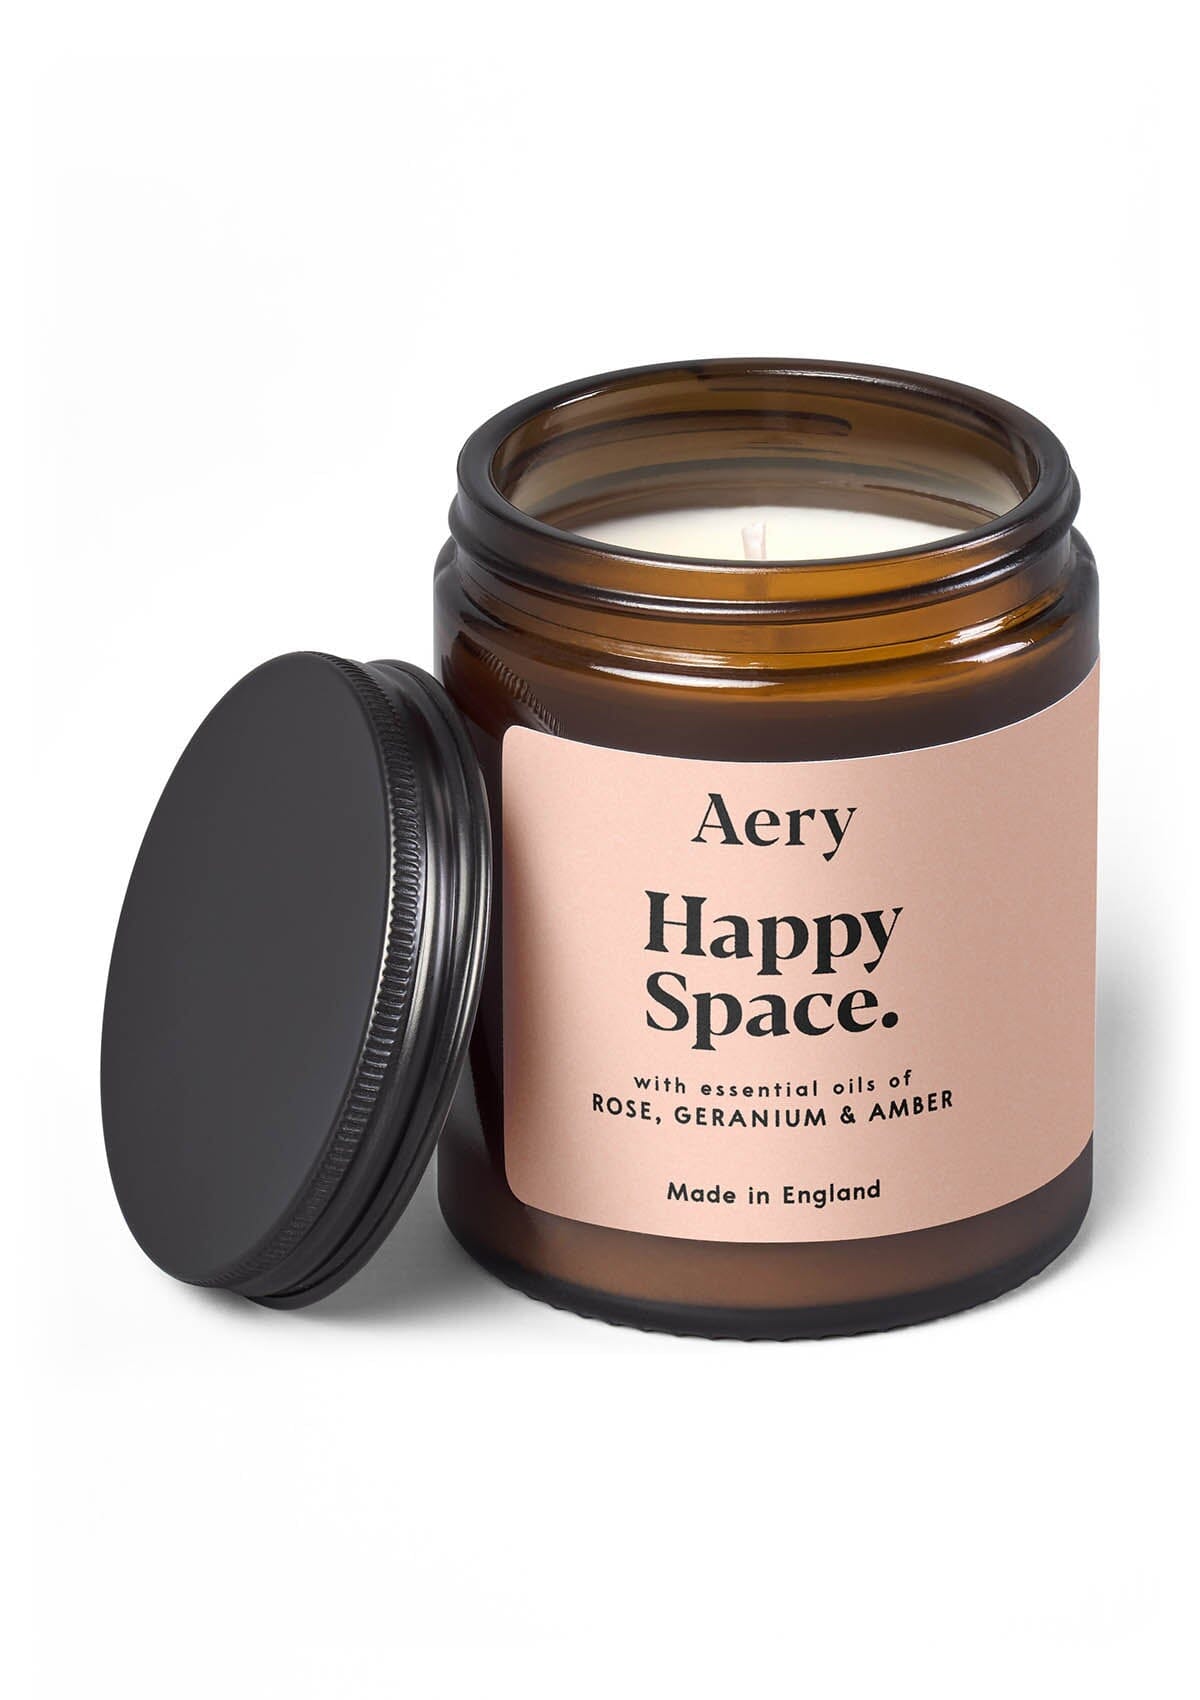 Pink Happy Space jar candle by Aery on white background 